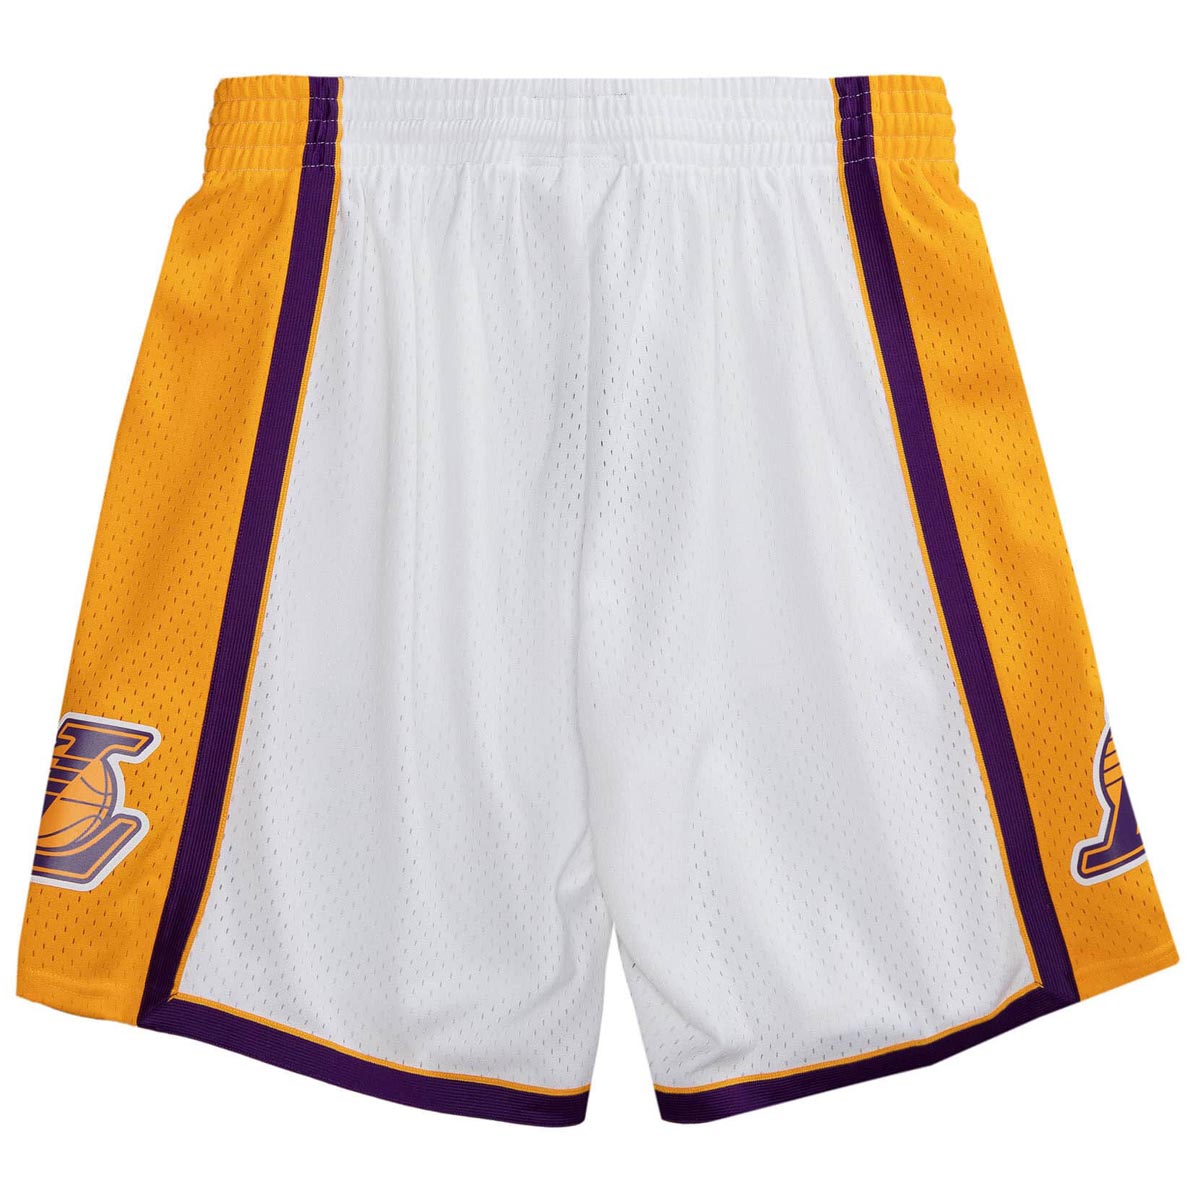 Mitchell & Ness x NBA Asg Patches Lakers Shorts - White image 2